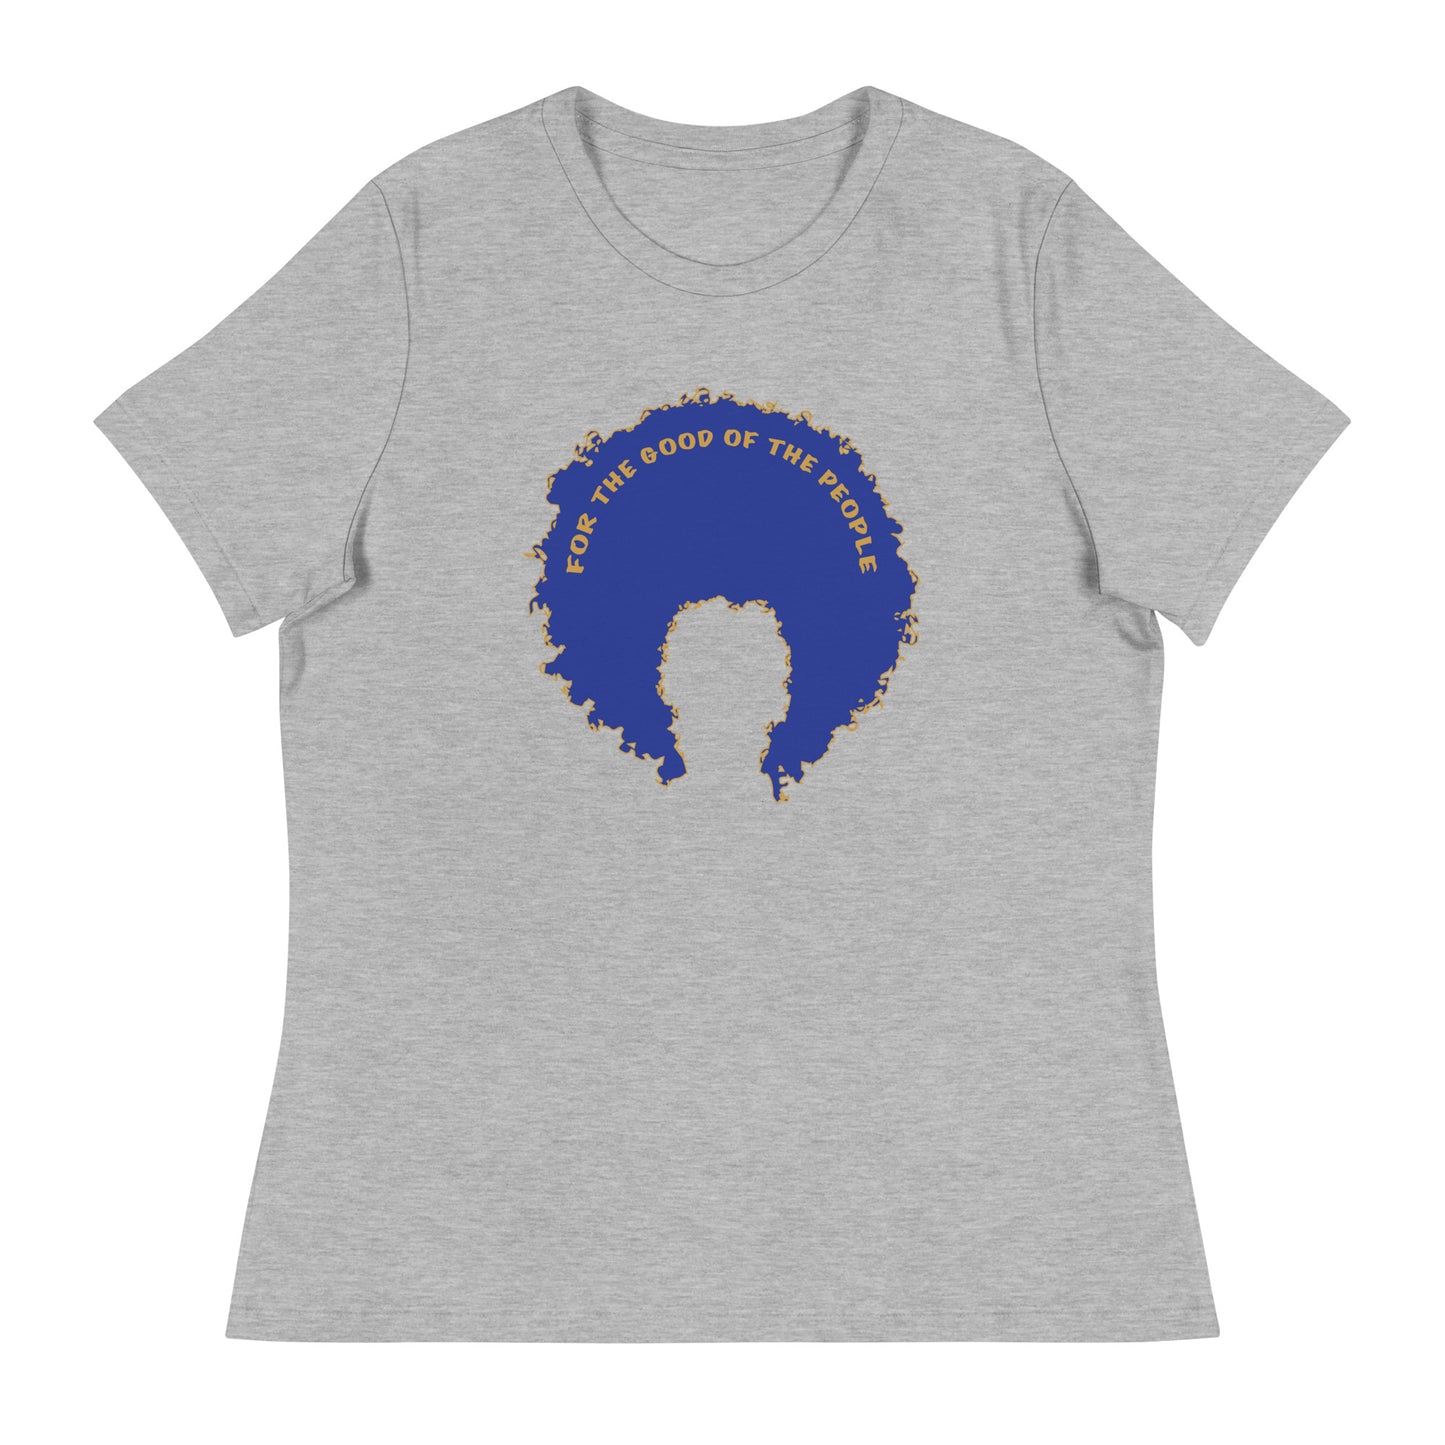 Heather gray women's tee with blue afro graphic trimmed in gold with for the good of the people in gold on the inside top of the afro.